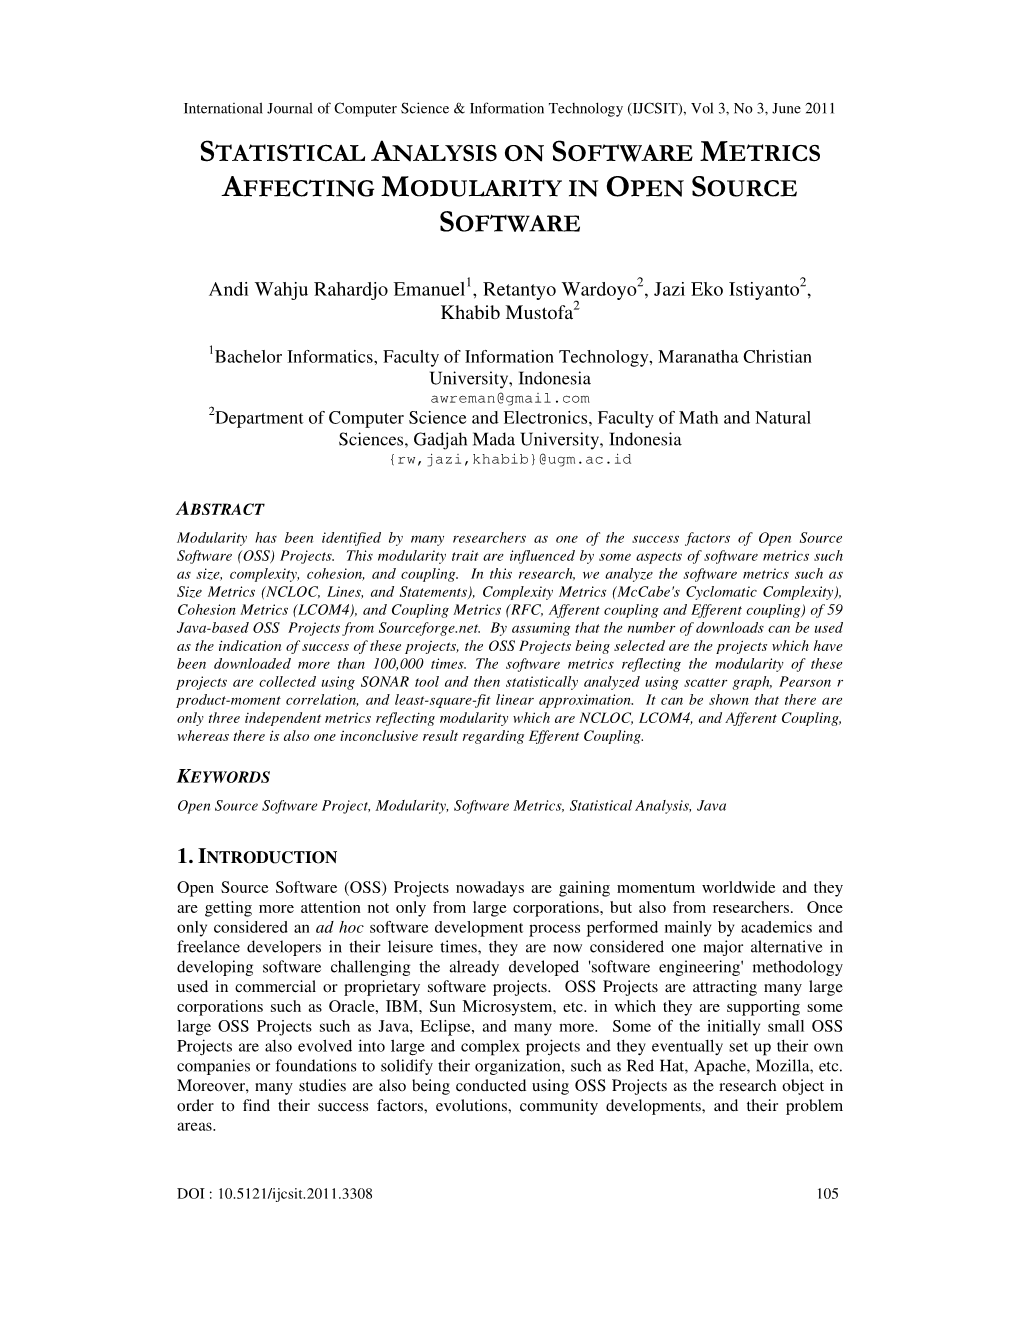 Statistical Analysis on Software Metrics Affecting Modularity in Open Source Software